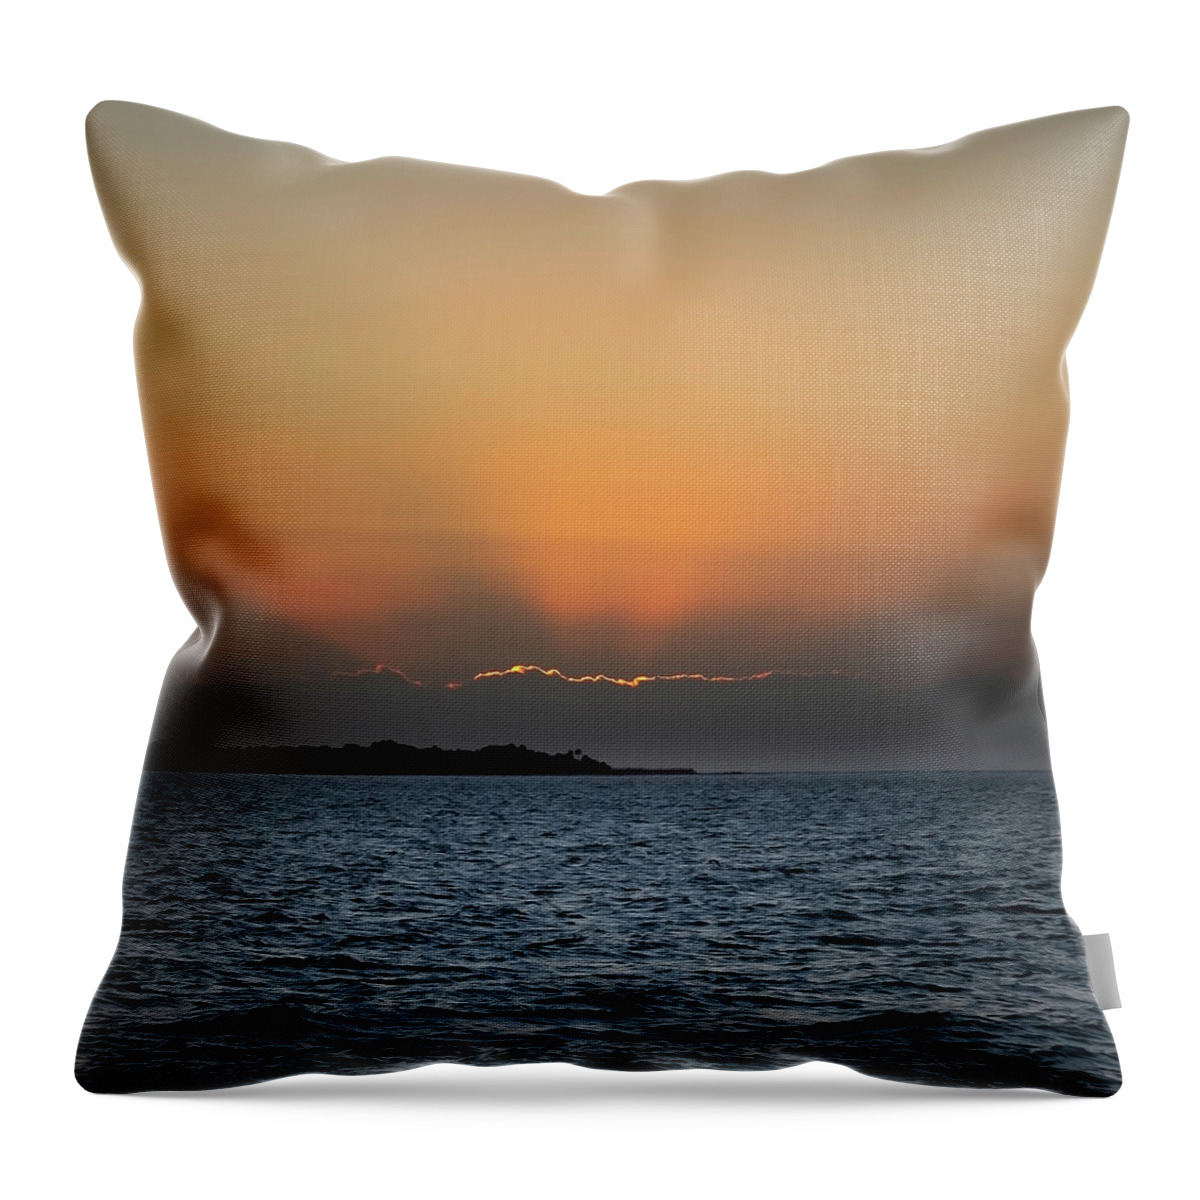  Throw Pillow featuring the photograph Florida #4 by Lars Mikkelsen